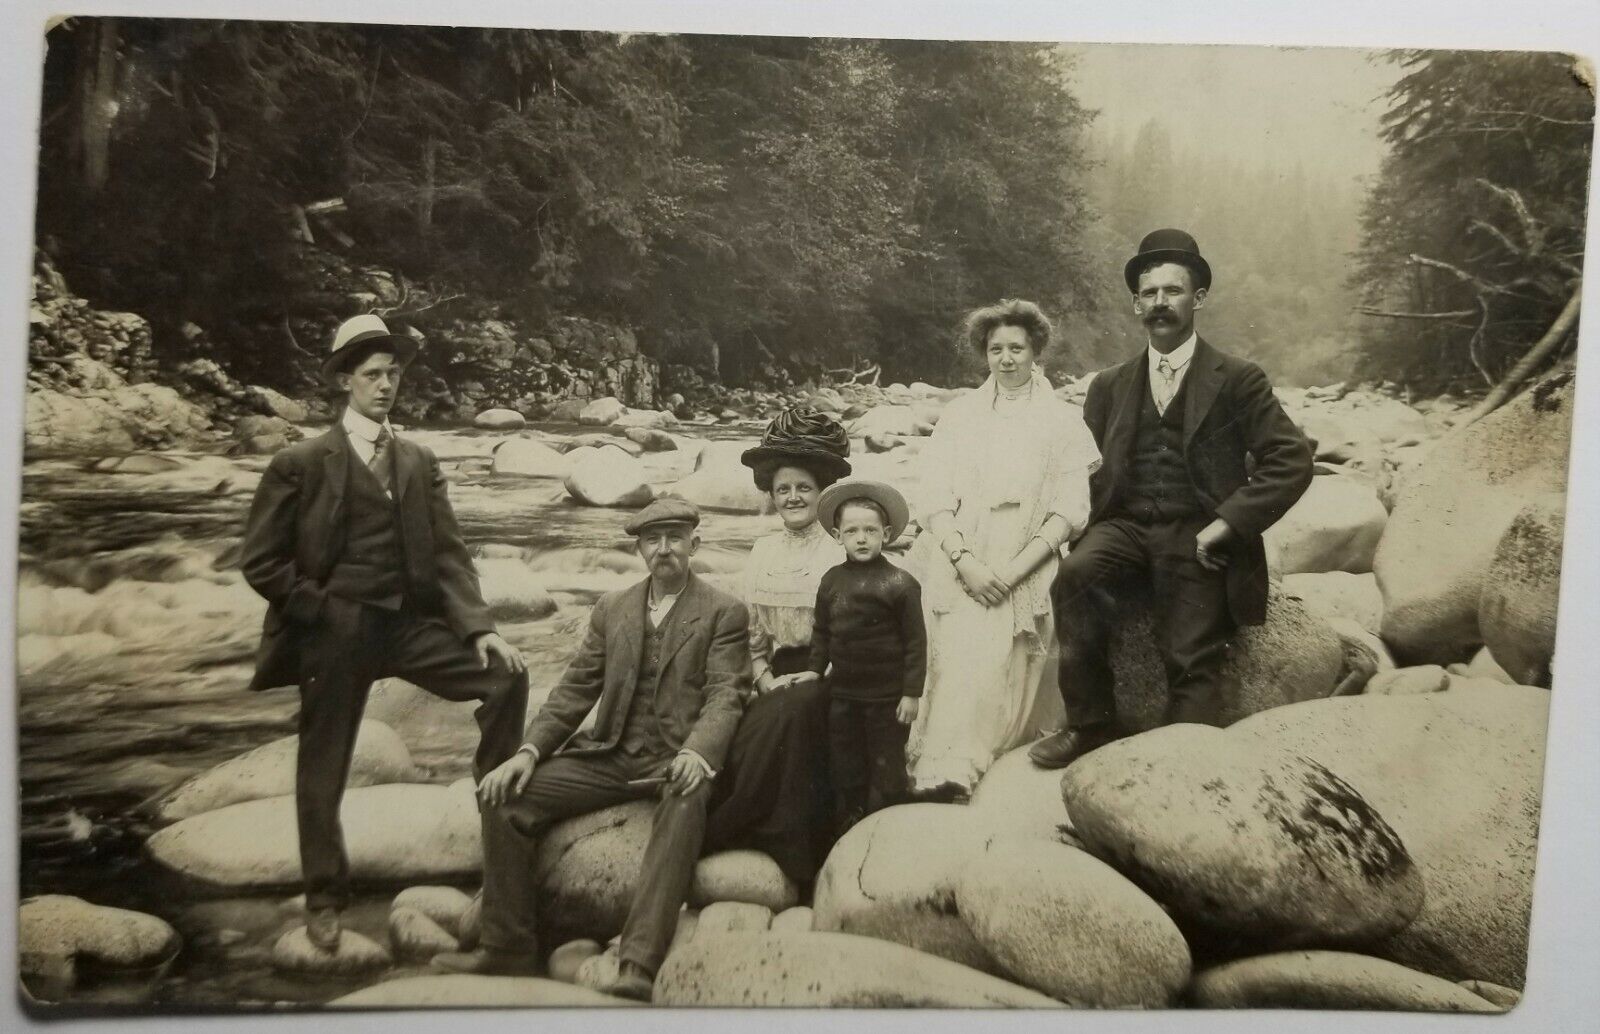 RPPC c 1925-1940 Family River Outing Card Photo bowler suit  E1B SP